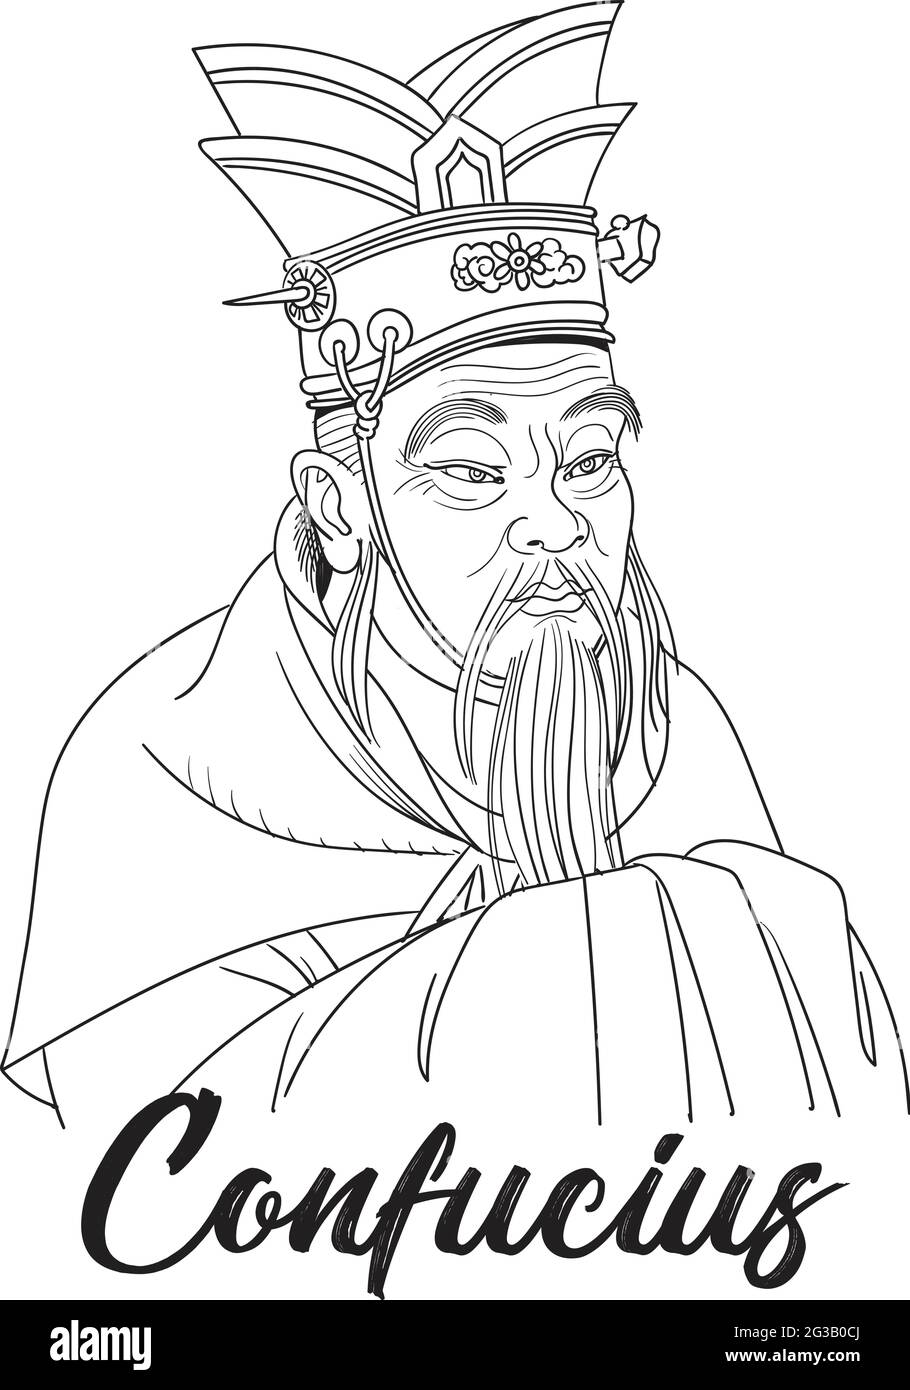 Confucius Image Element Pattern Line Draft Confucius Pictures Confucius  PNG Transparent Clipart Image and PSD File for Free Download